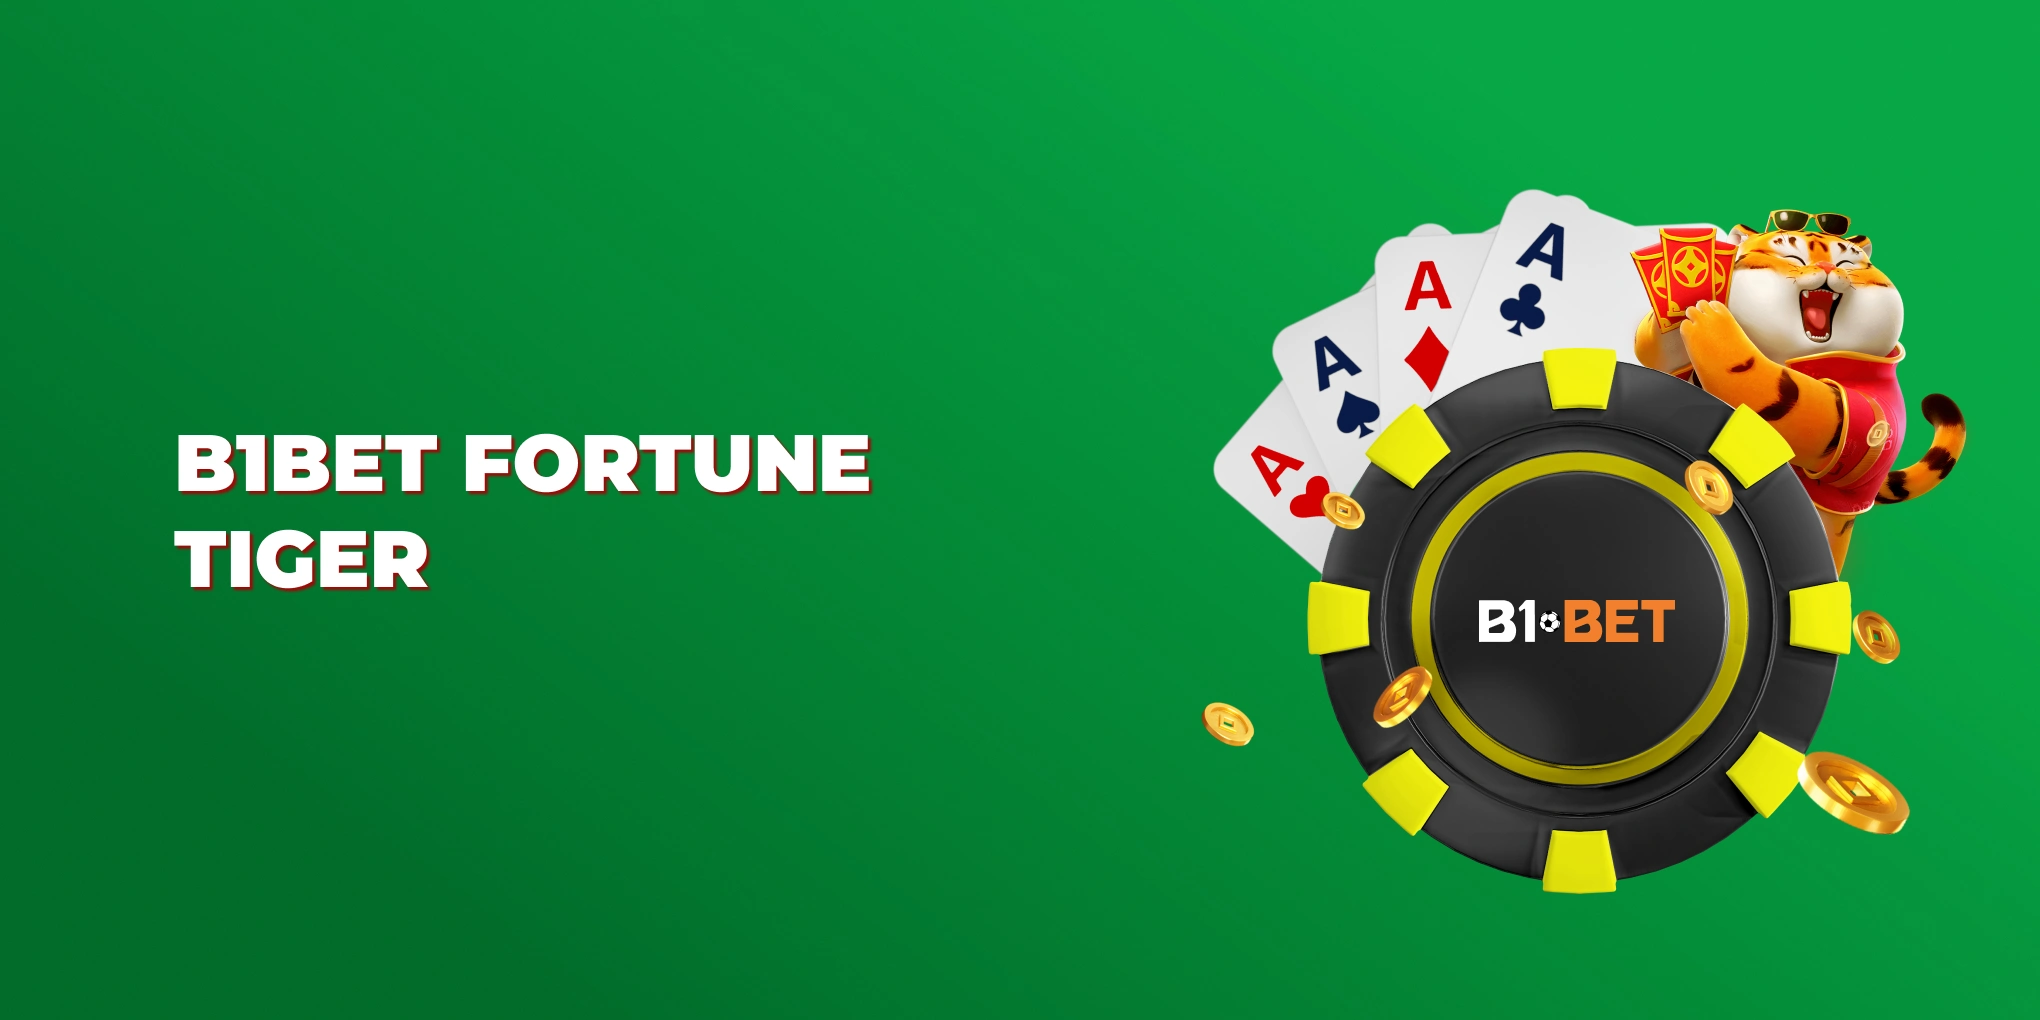 b1bet fortune tiger